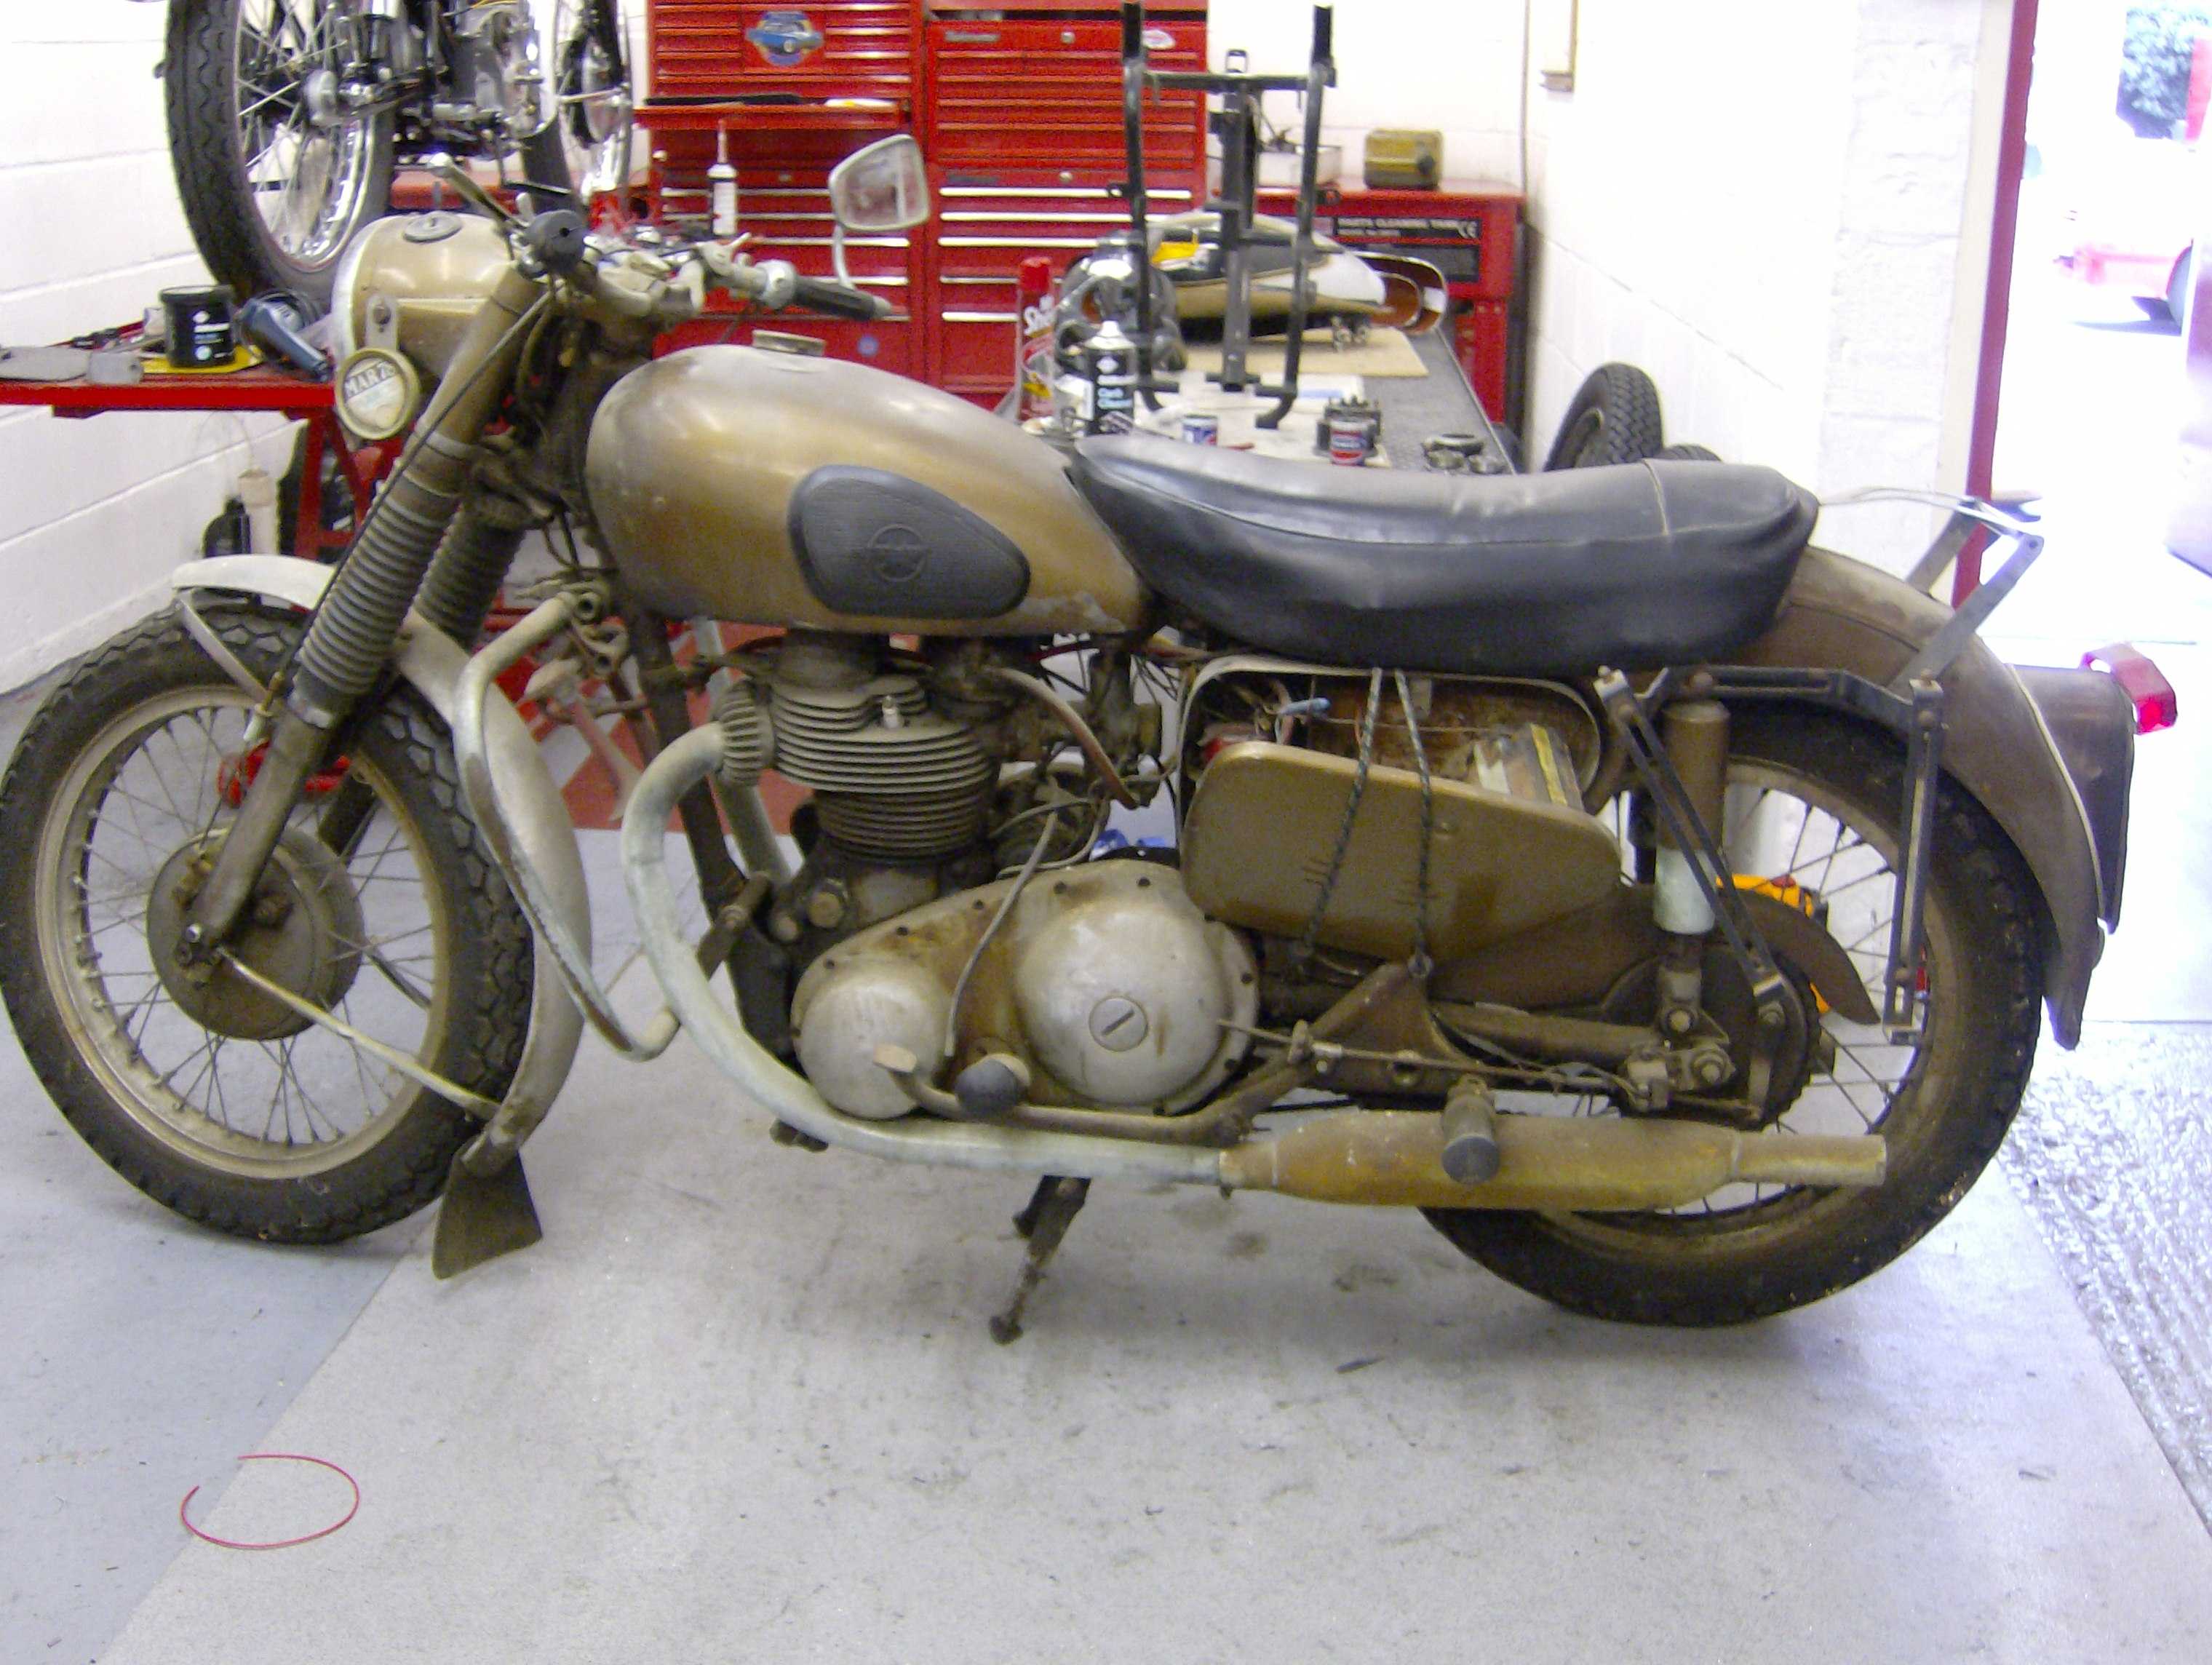 A new arrival, A G12 Matchless that has seen better days and will again soon. Last used in 1978